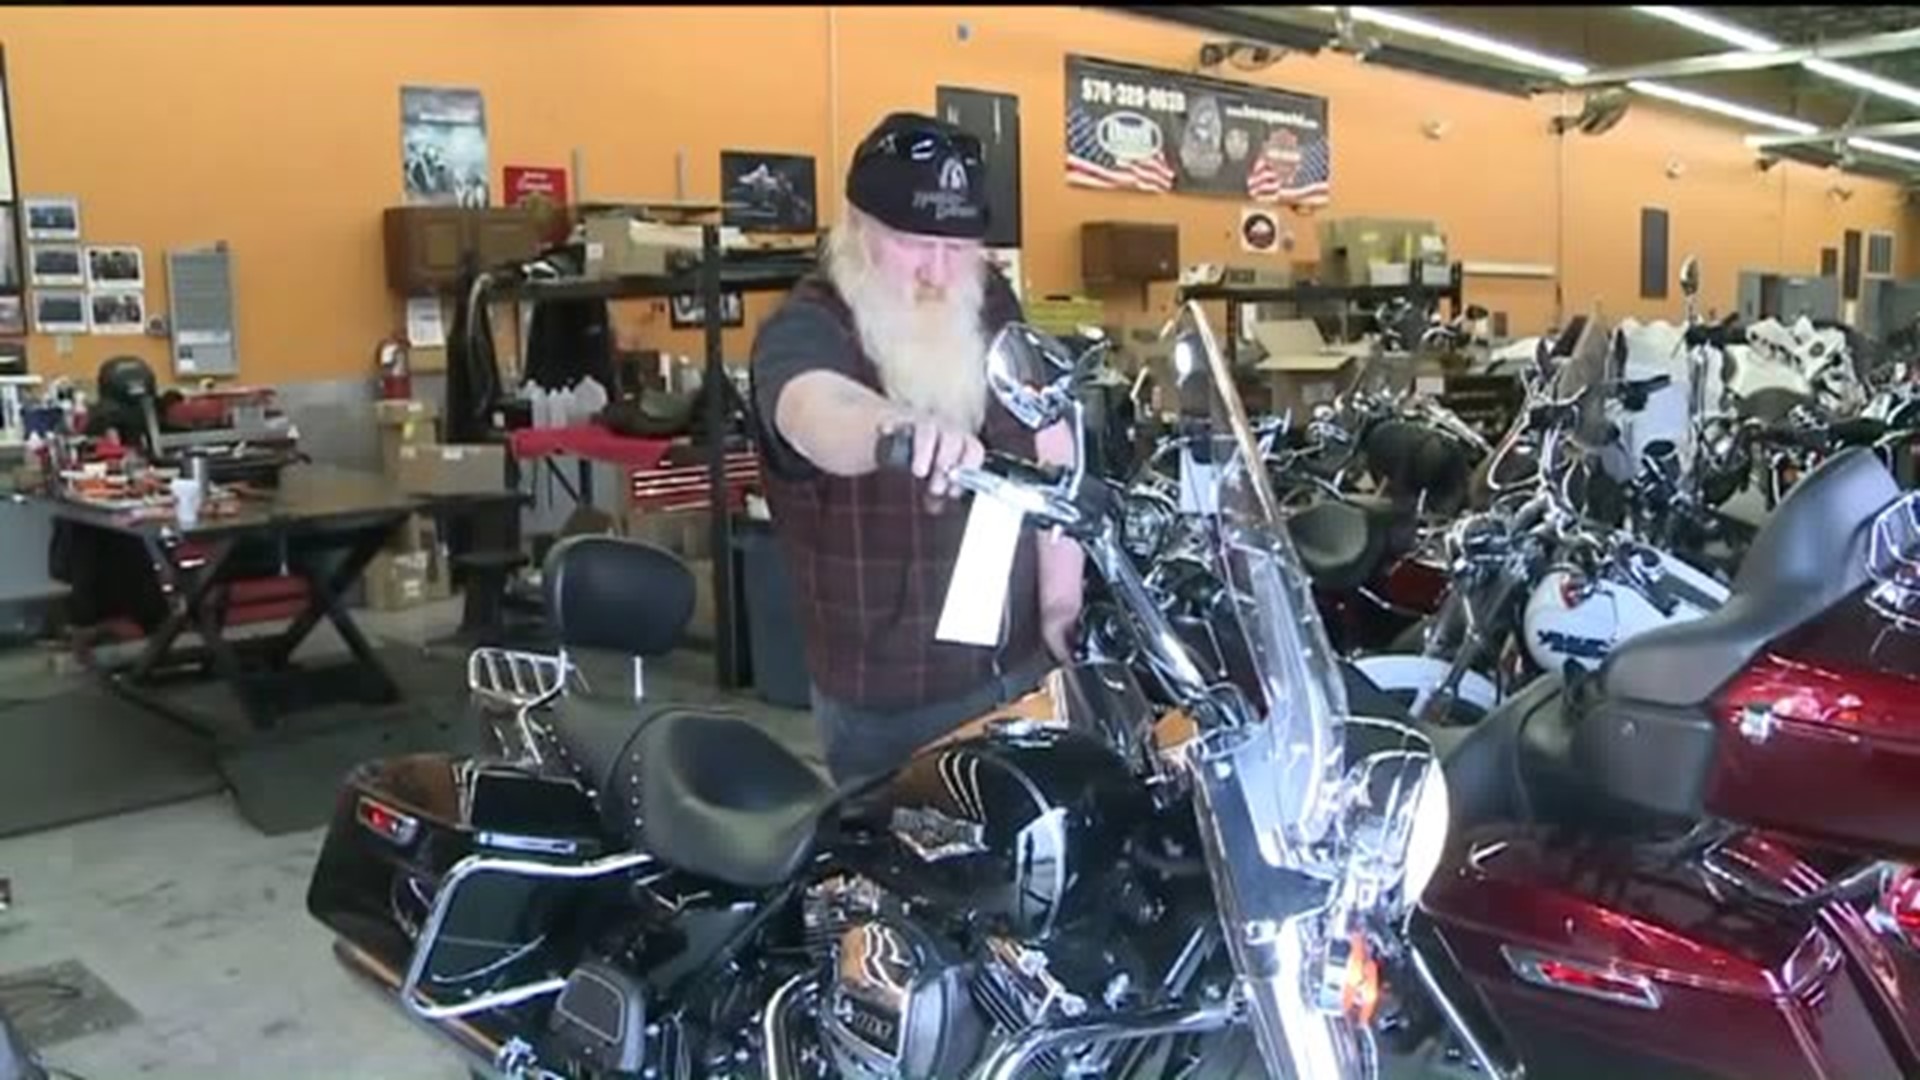 Motorcycle Riders Gearing Up for Warmer Weather